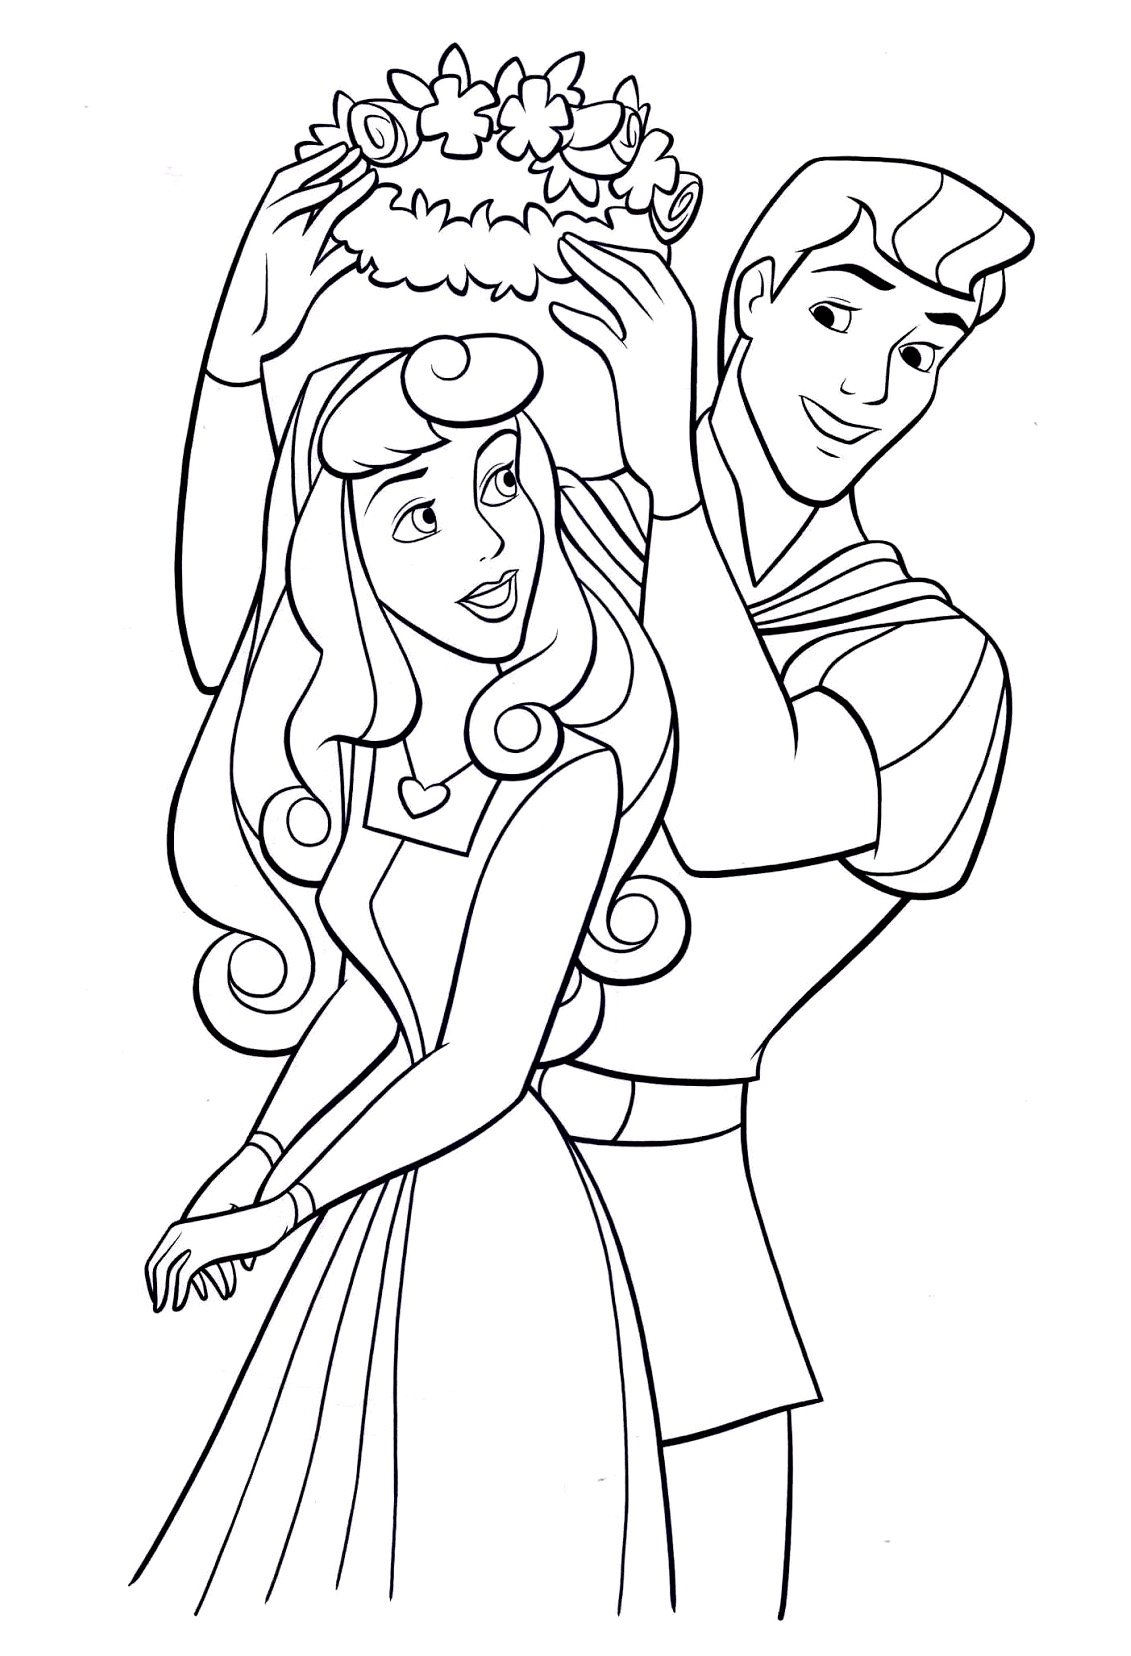 Sleeping beauty to color for children   Sleeping beauty Kids ...